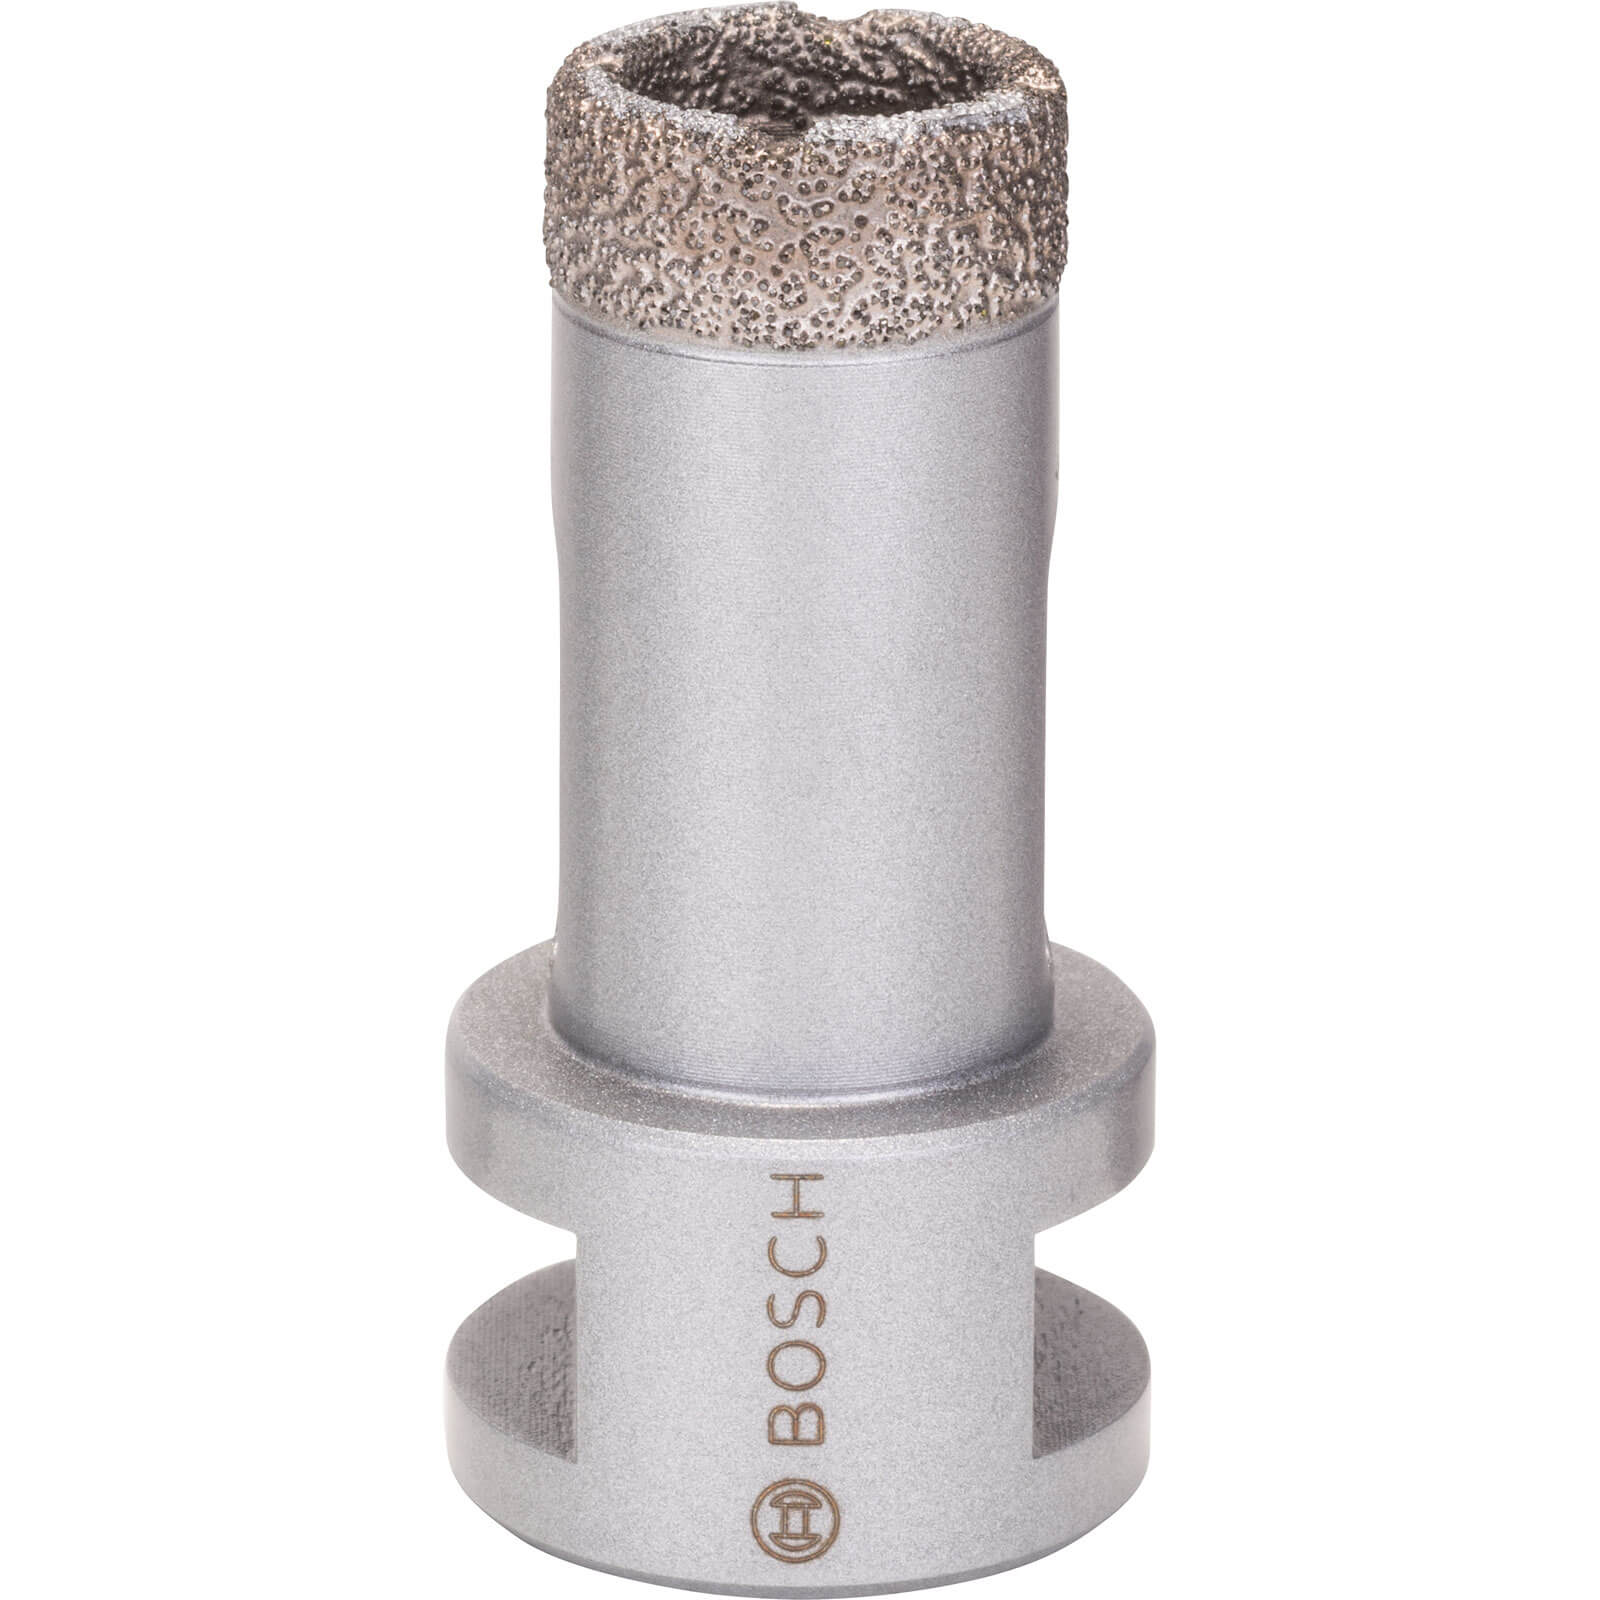 Image of Bosch Angle Grinder Dry Diamond Hole Cutter For Ceramics 22mm